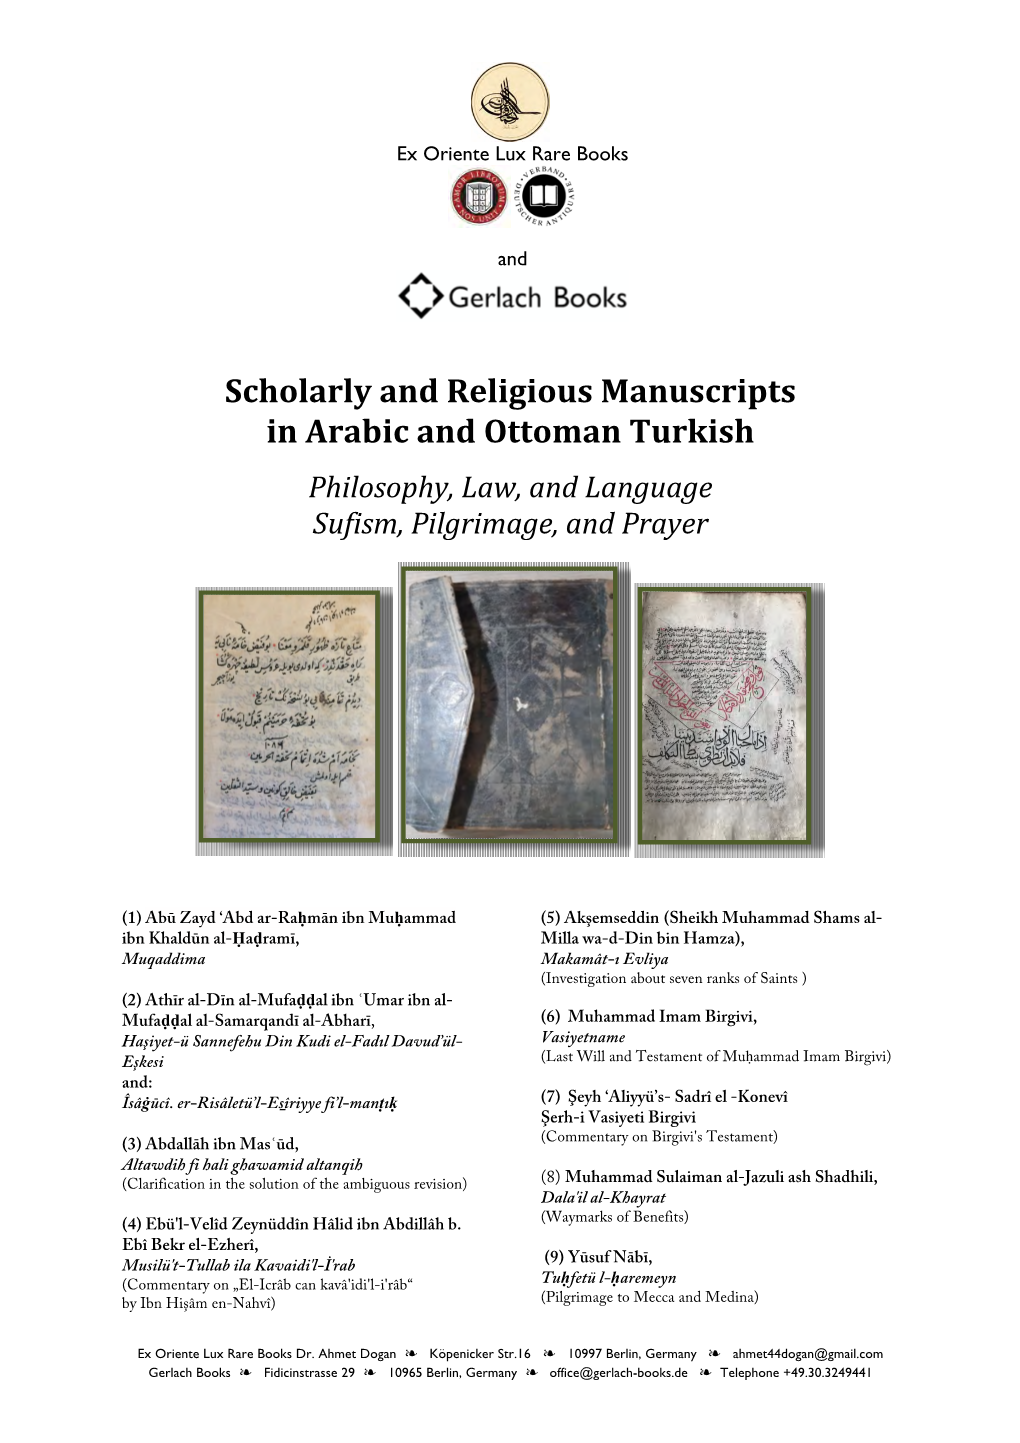 Scholarly and Religious Manuscripts in Arabic and Ottoman Turkish